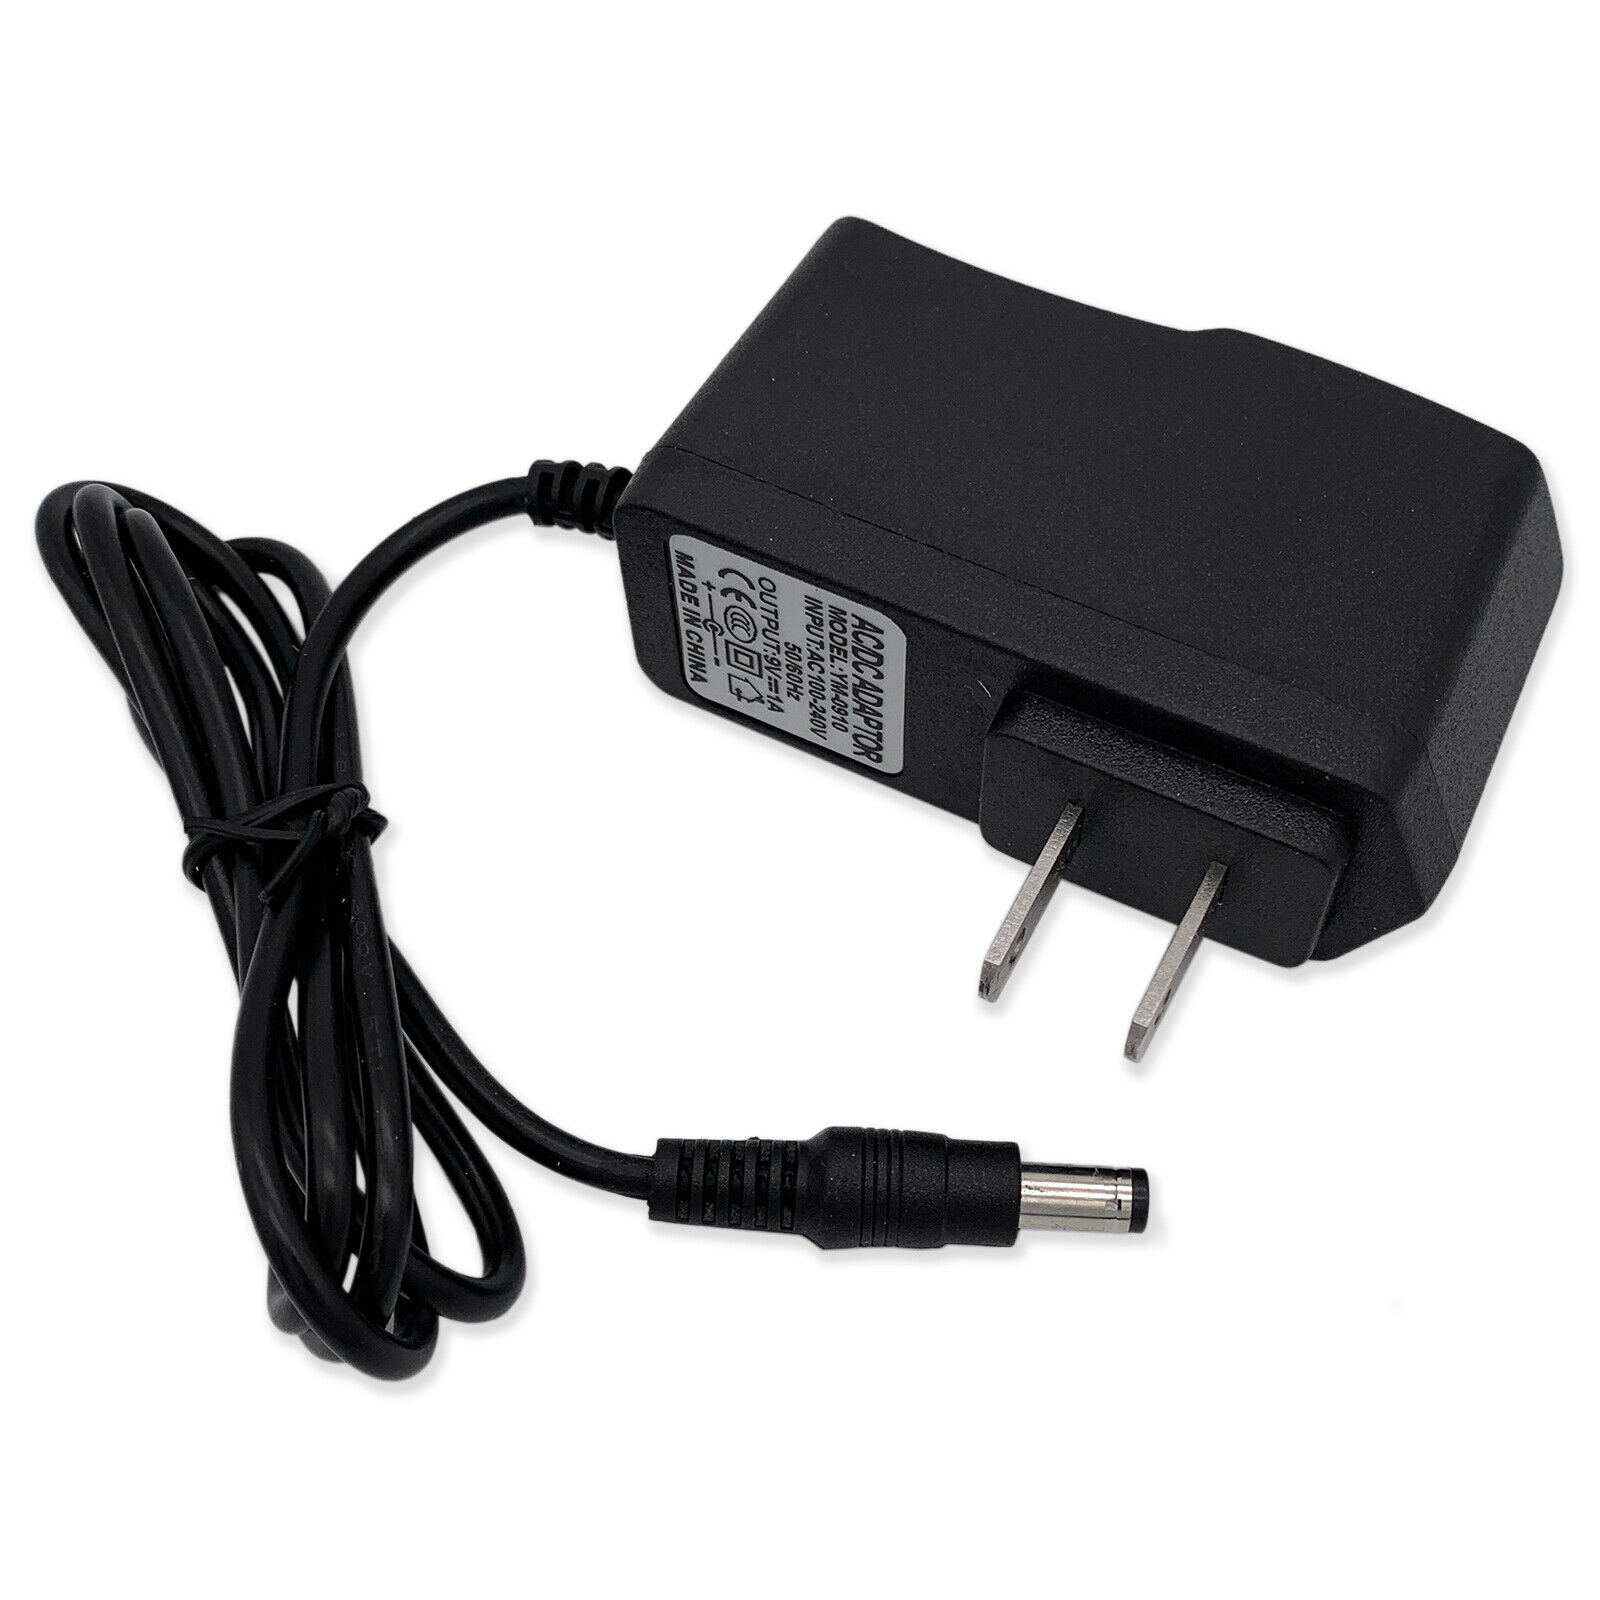 9V 1A AC/DC Adapter For Boss DS-1 Distortion Guitar Effect Pedal Charger Power